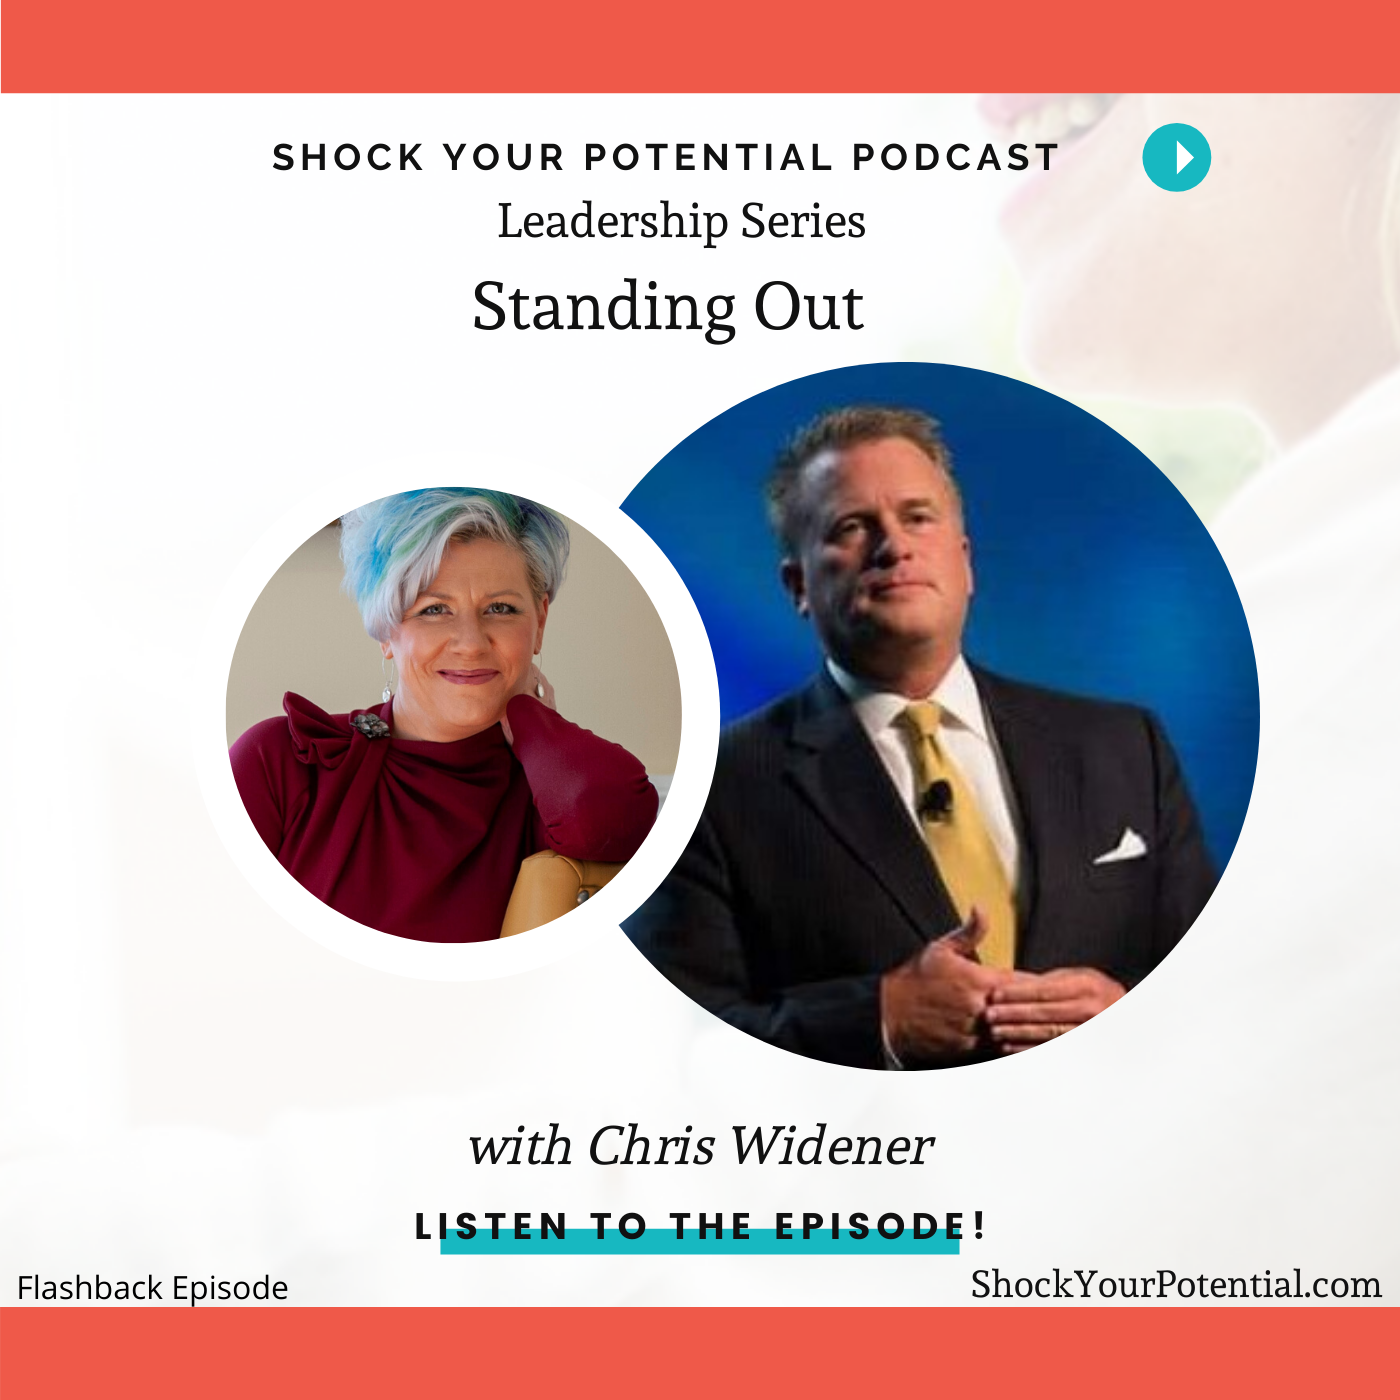 Standing Out – Chris Widener